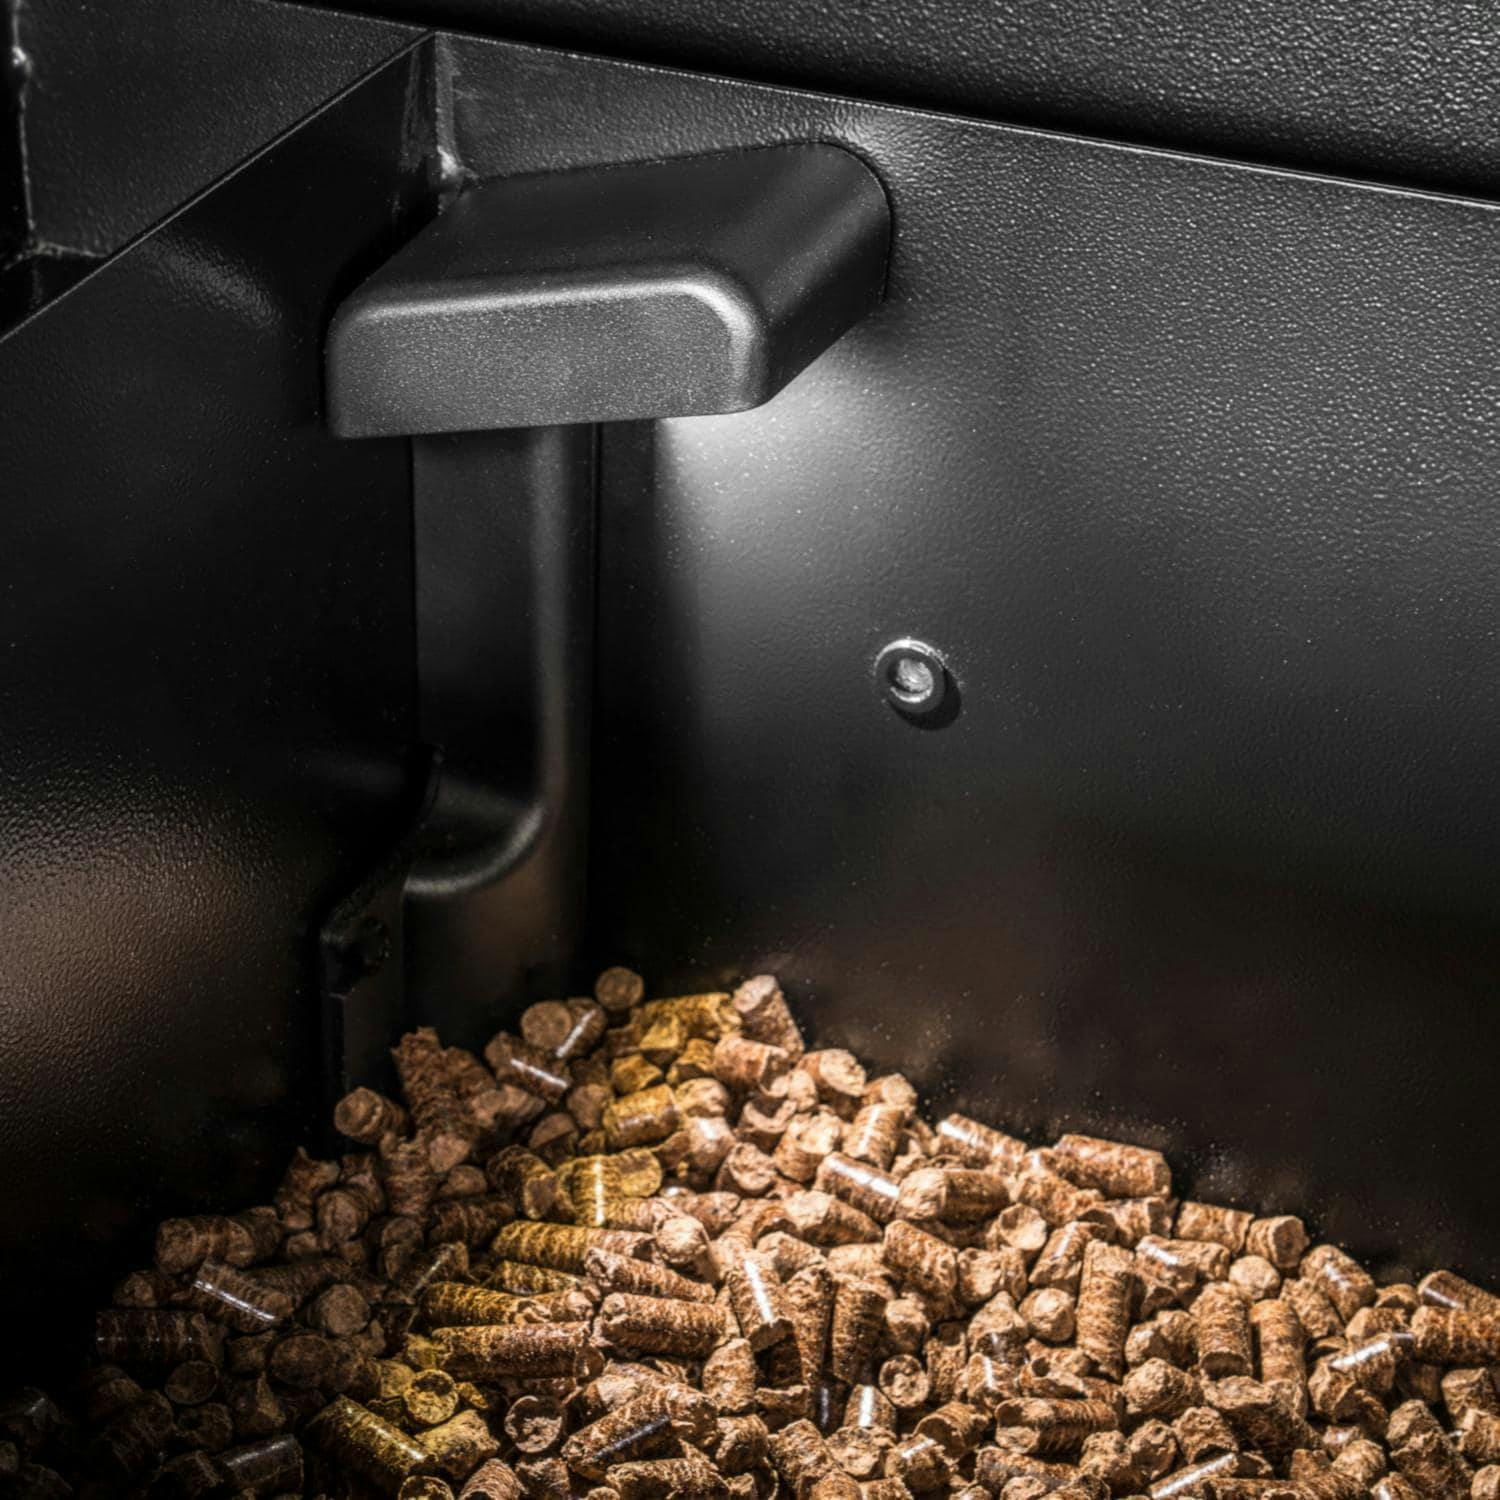 Traeger Ironwood 885 Wi-Fi Controlled Wood Pellet Grill with WiFire & Pellet Sensor · 54 in.